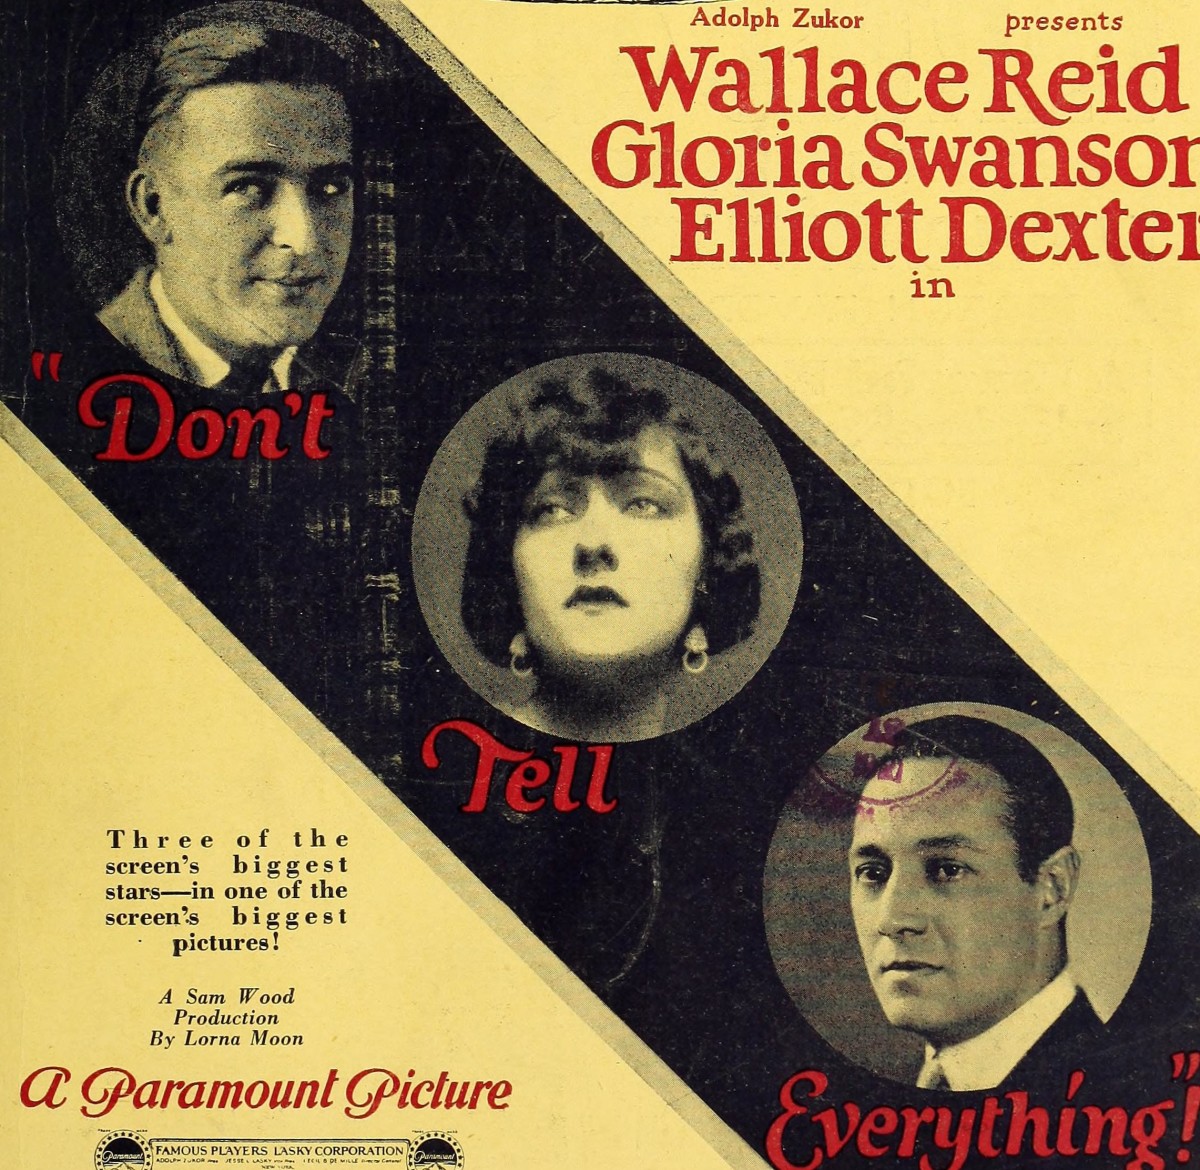 Don't Tell Everything. Paramount Pictures Film Ad Card.